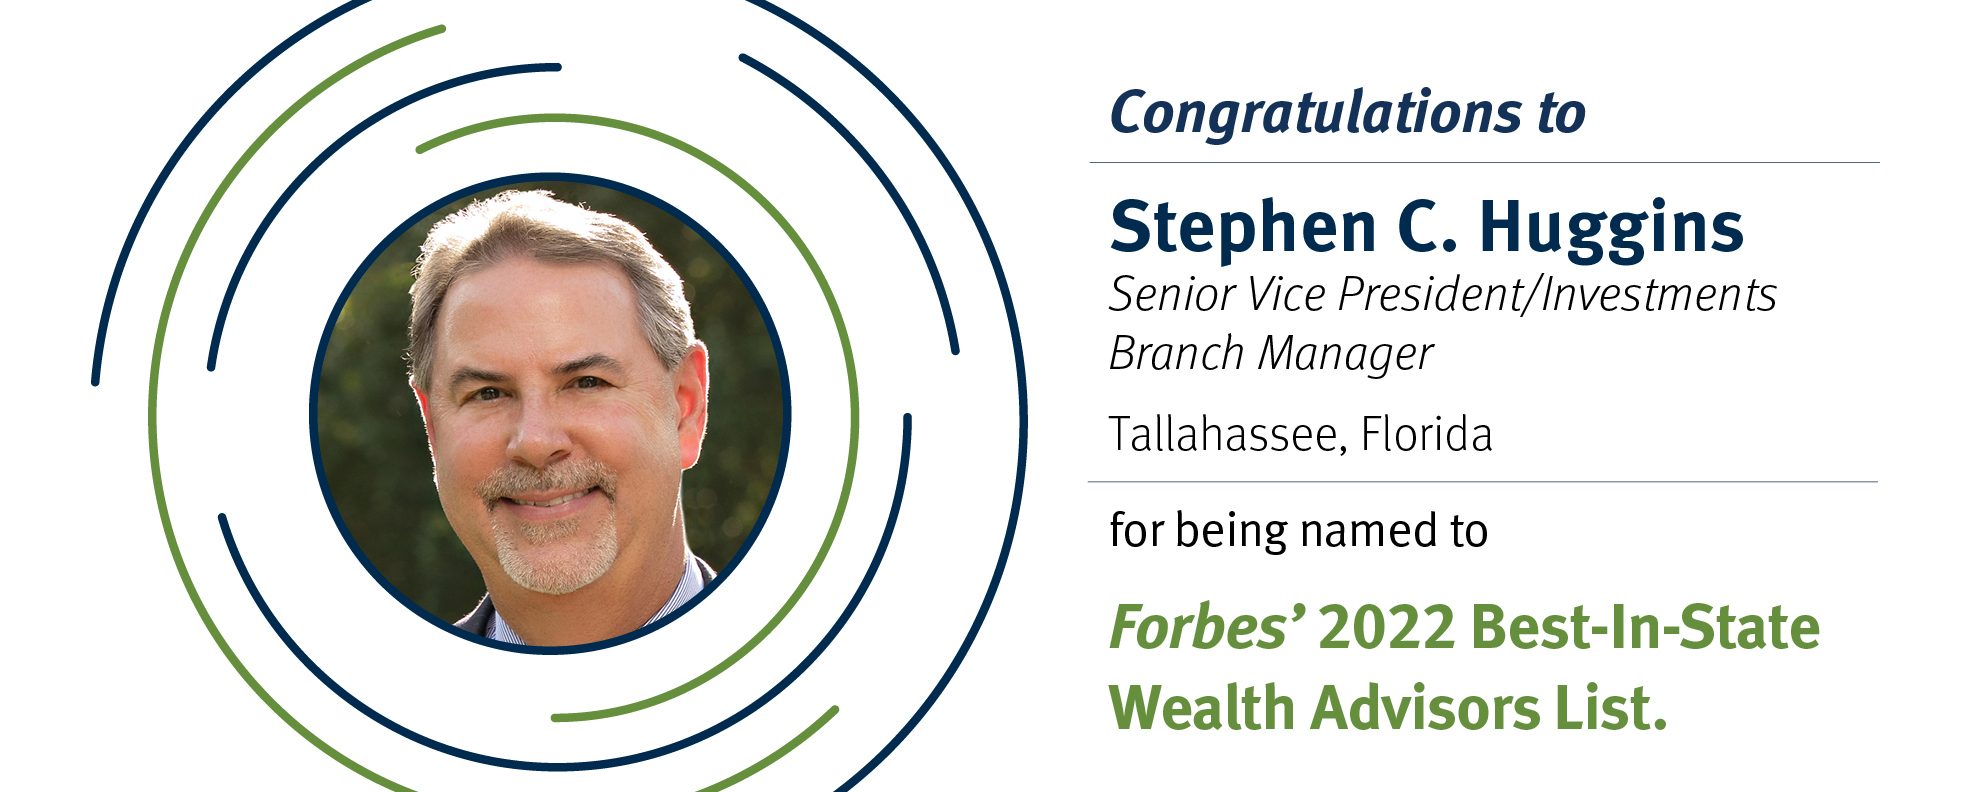 Congratulations to Stephen C. Huggins Senior Vice President/Investments Branch Manager Tallahassee, Florida  for being named to  Forbes’ 2022 Best-In-State Wealth Advisors List.